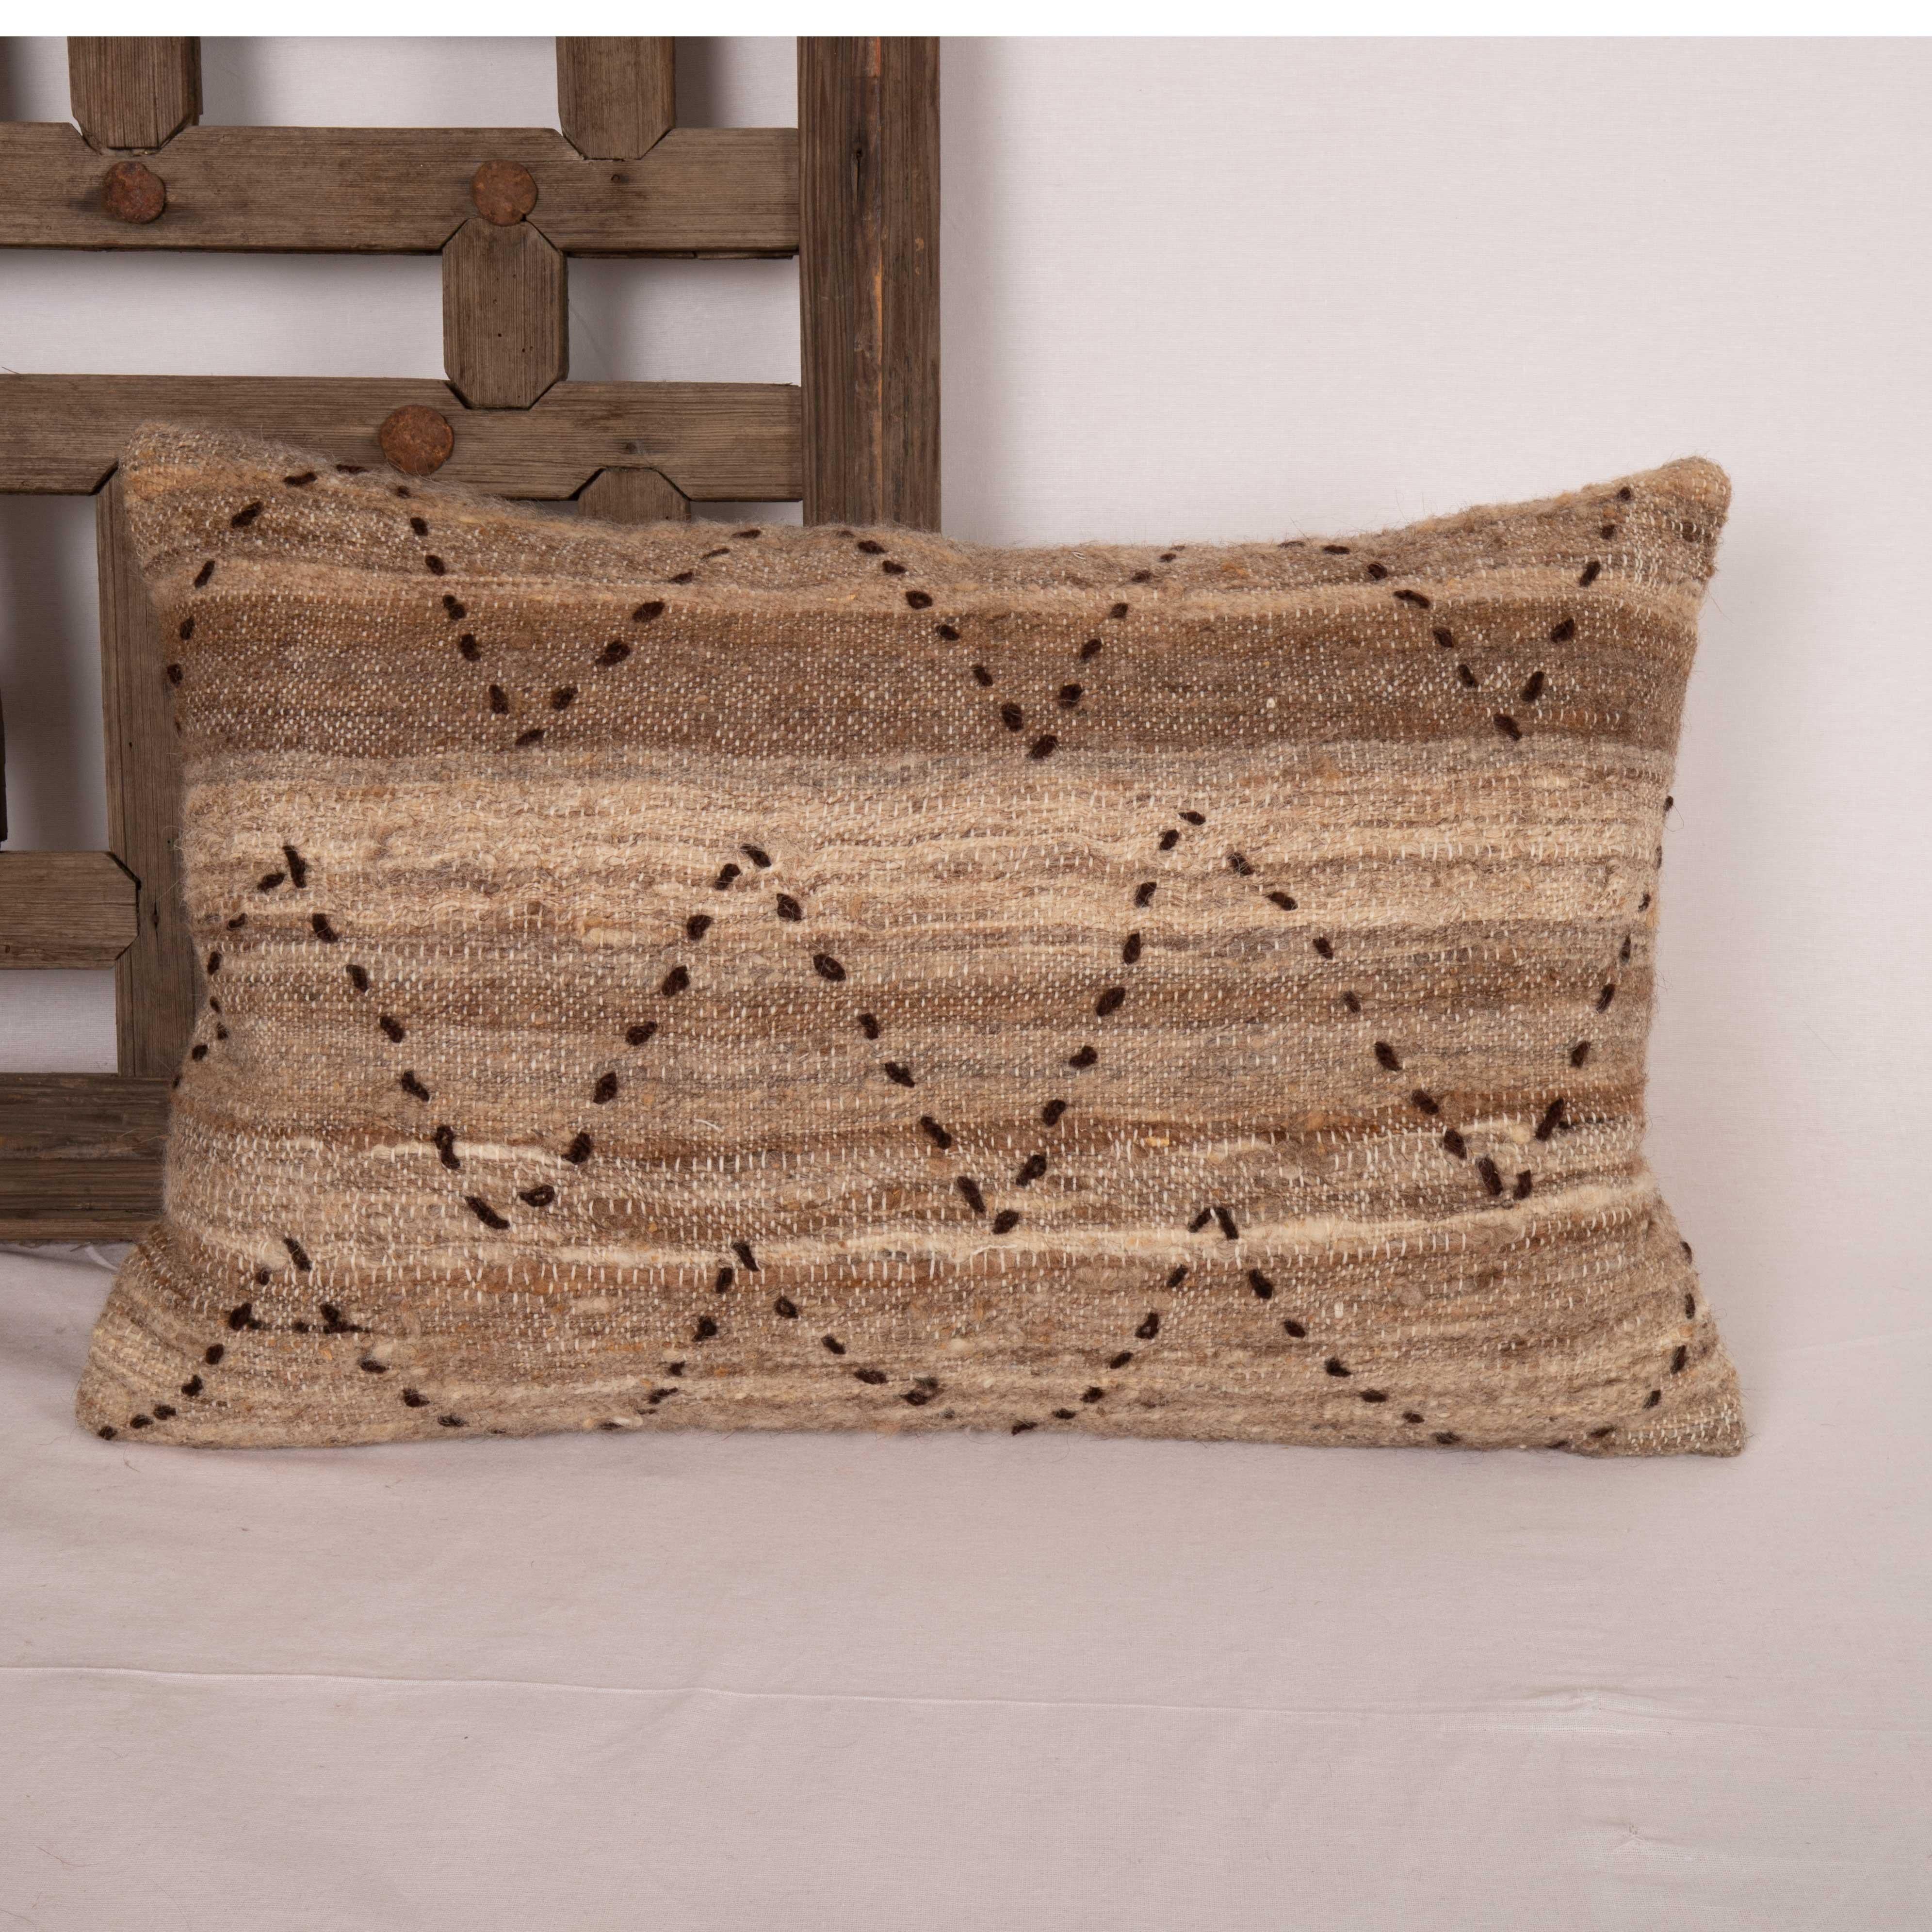 The materials this pillowcase is made from purely natural , undyed wool, dating back to mid 20th C.
Embroidered design elements on it are our design and they are purely hand done on the vintage materials.
It does not come with an insert.
Linen in